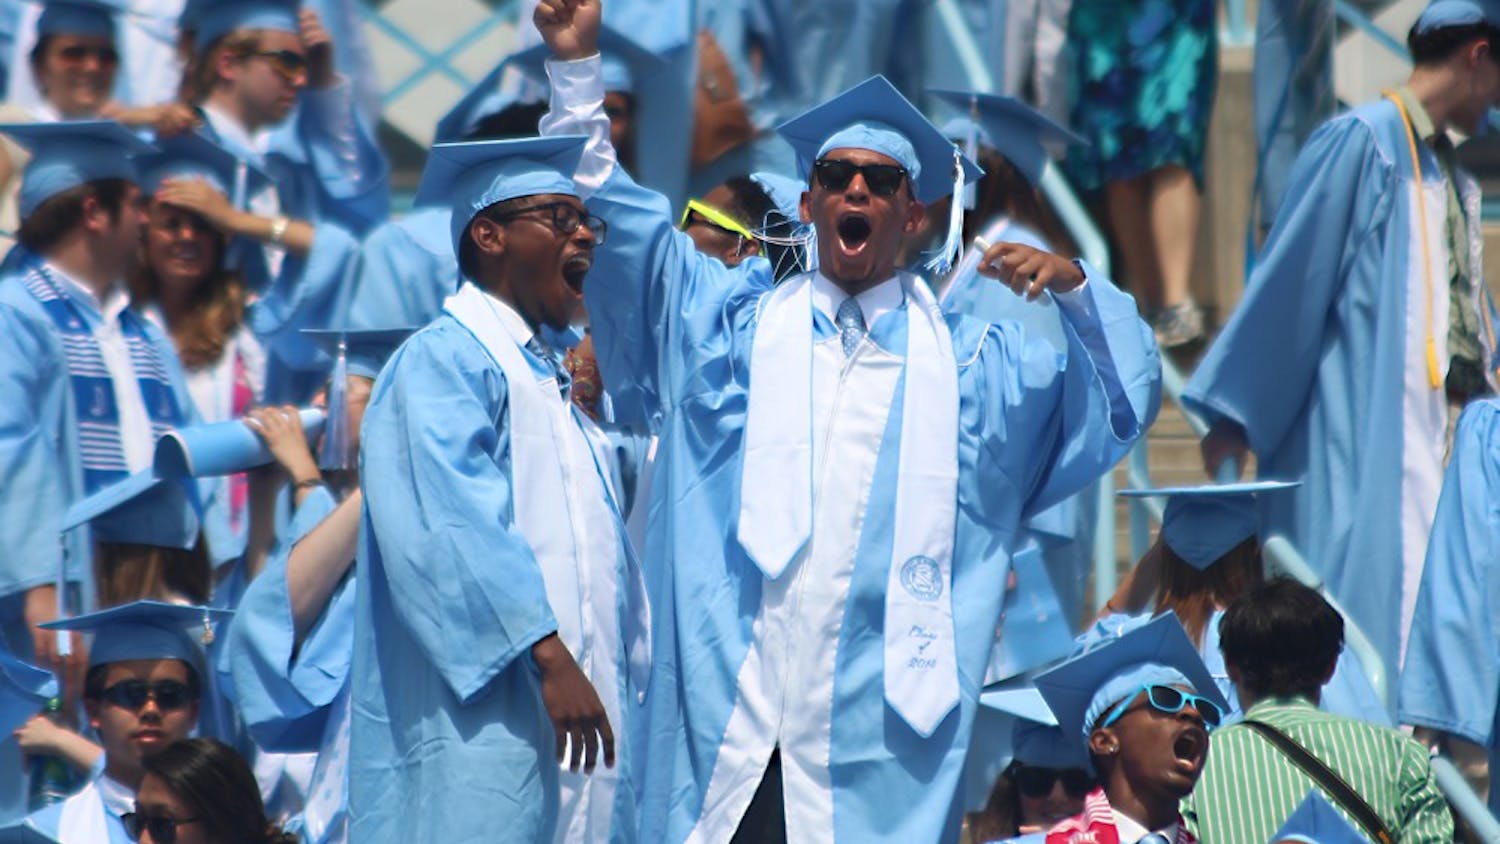 Graduation hosted 33,000 people on Sunday afternoon in order to honor degree earning students of the University of North Carolina at Chapel Hill. 